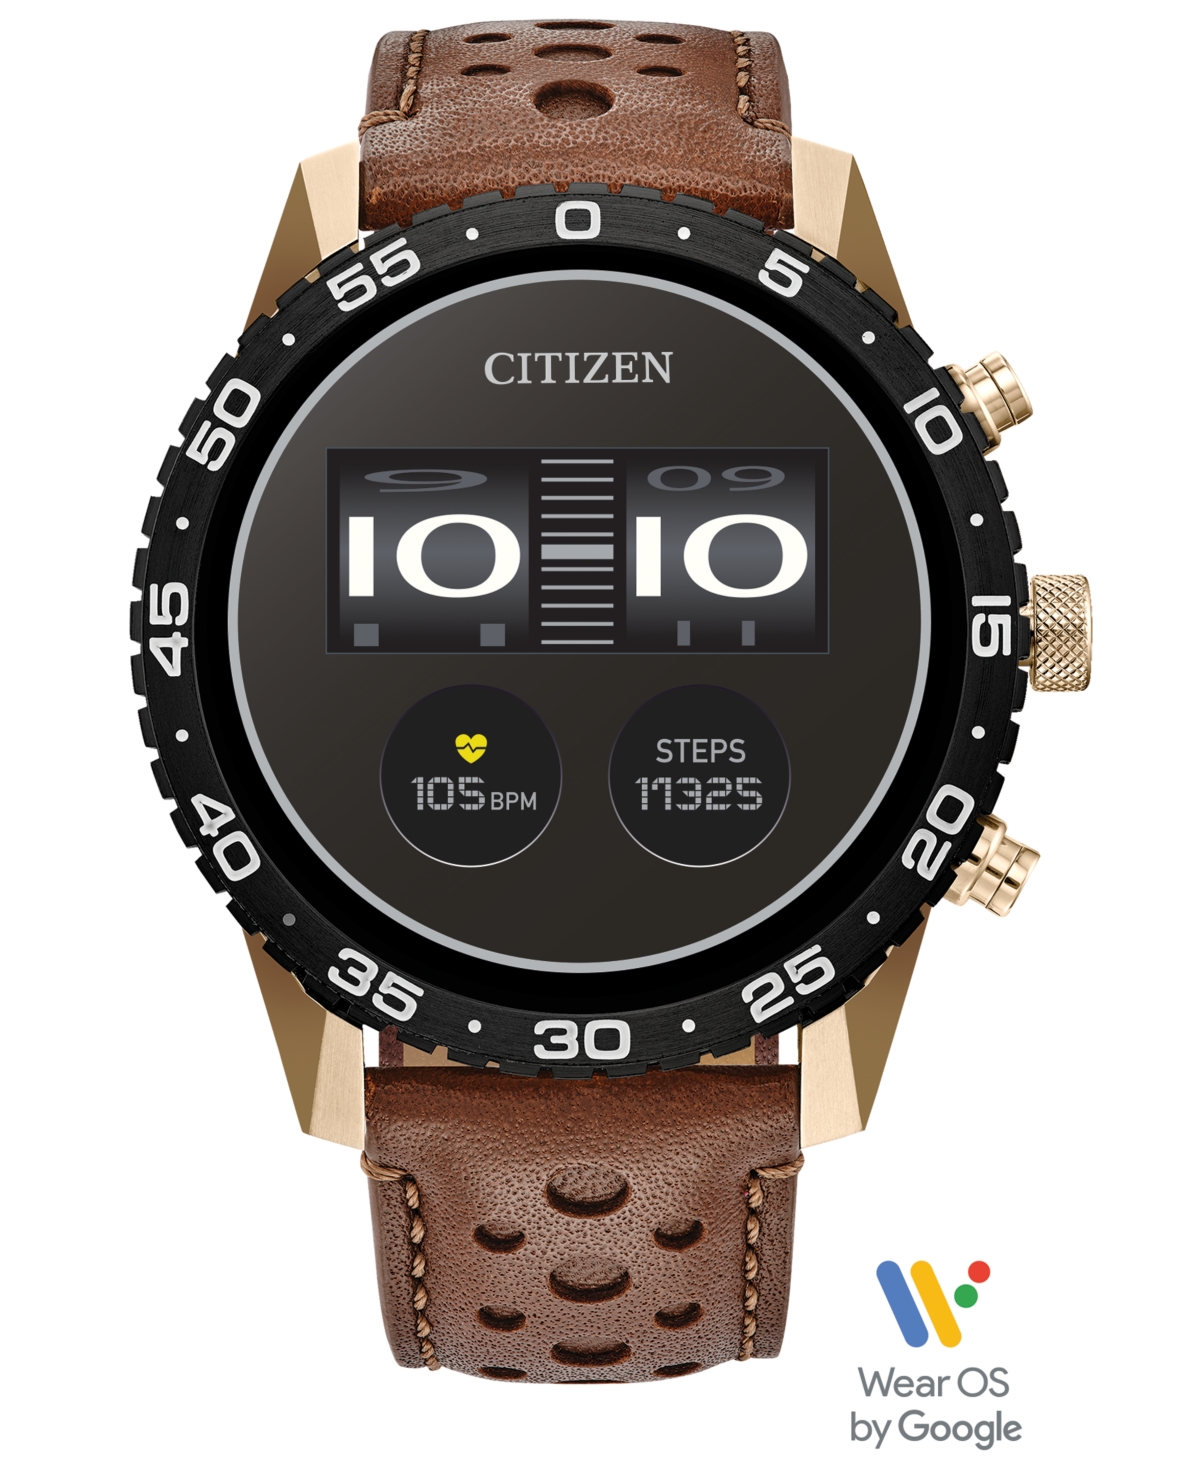 Citizen Unisex Cz Smart Wear Os Brown Perforated Leather Strap Smart Watch 45mm In Rose Gold-tone